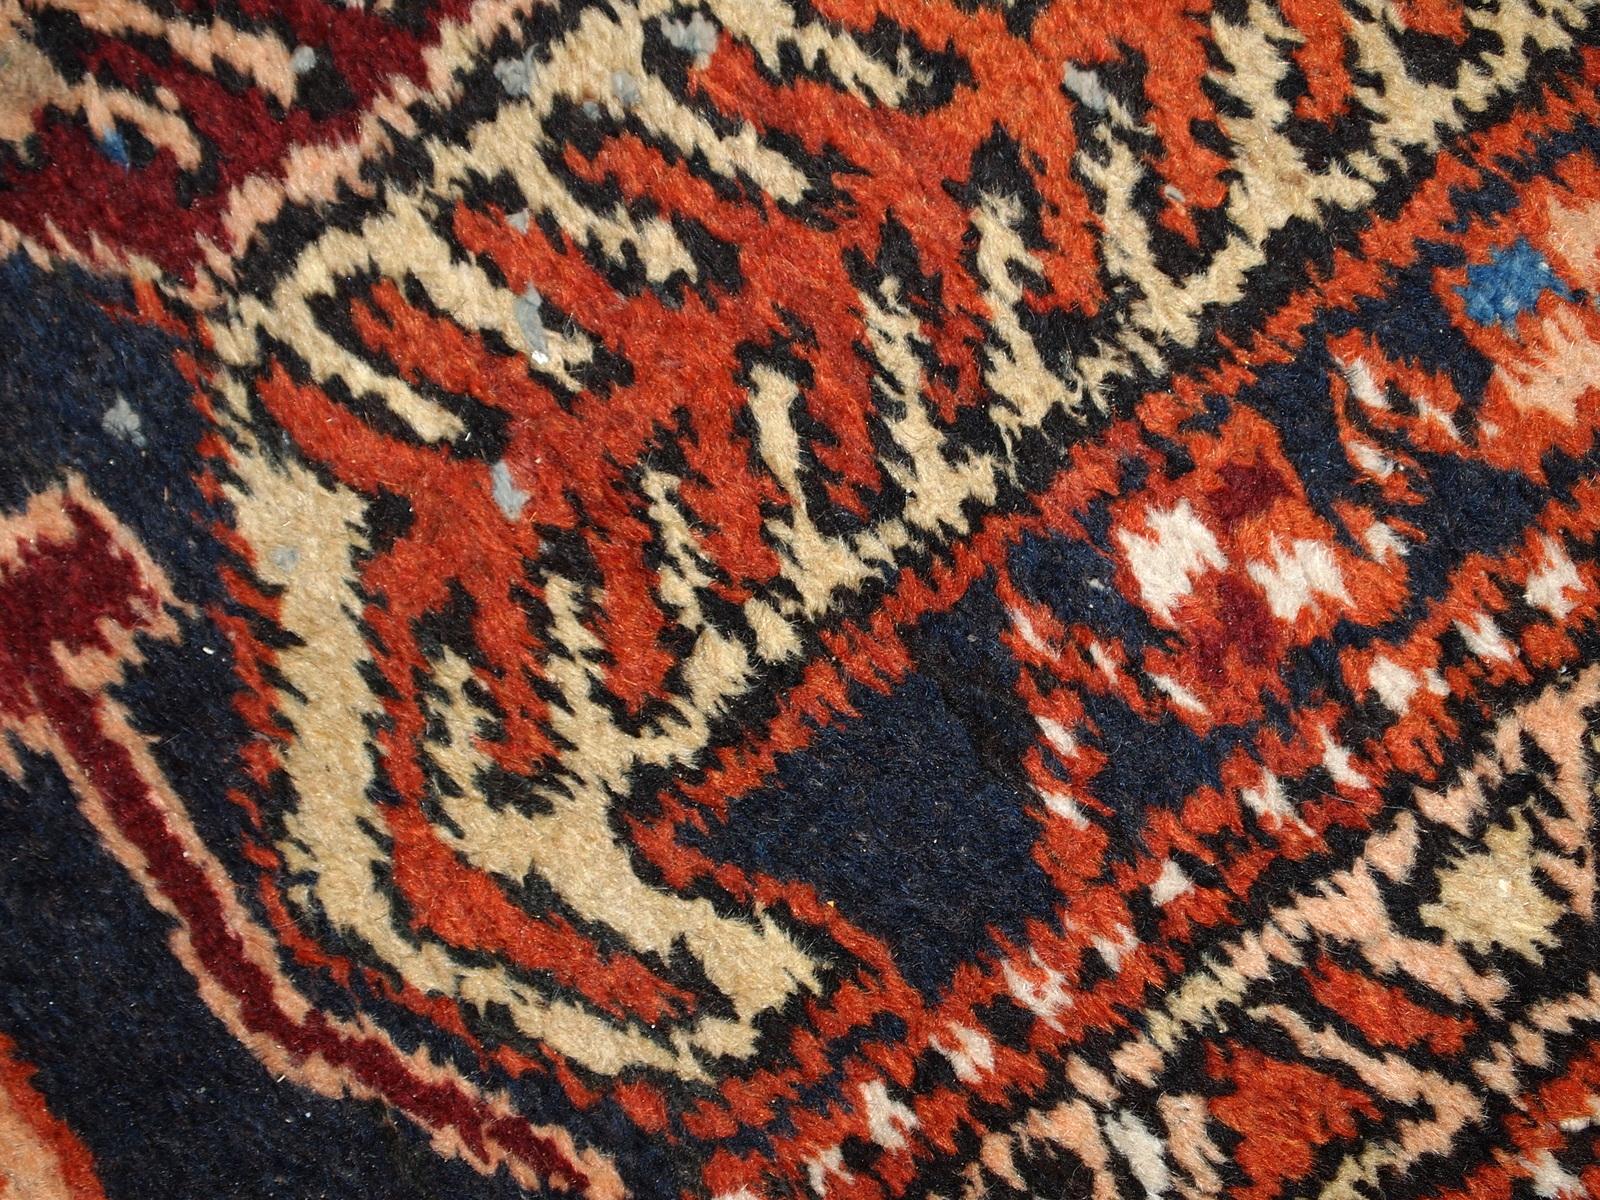 1930s style rugs